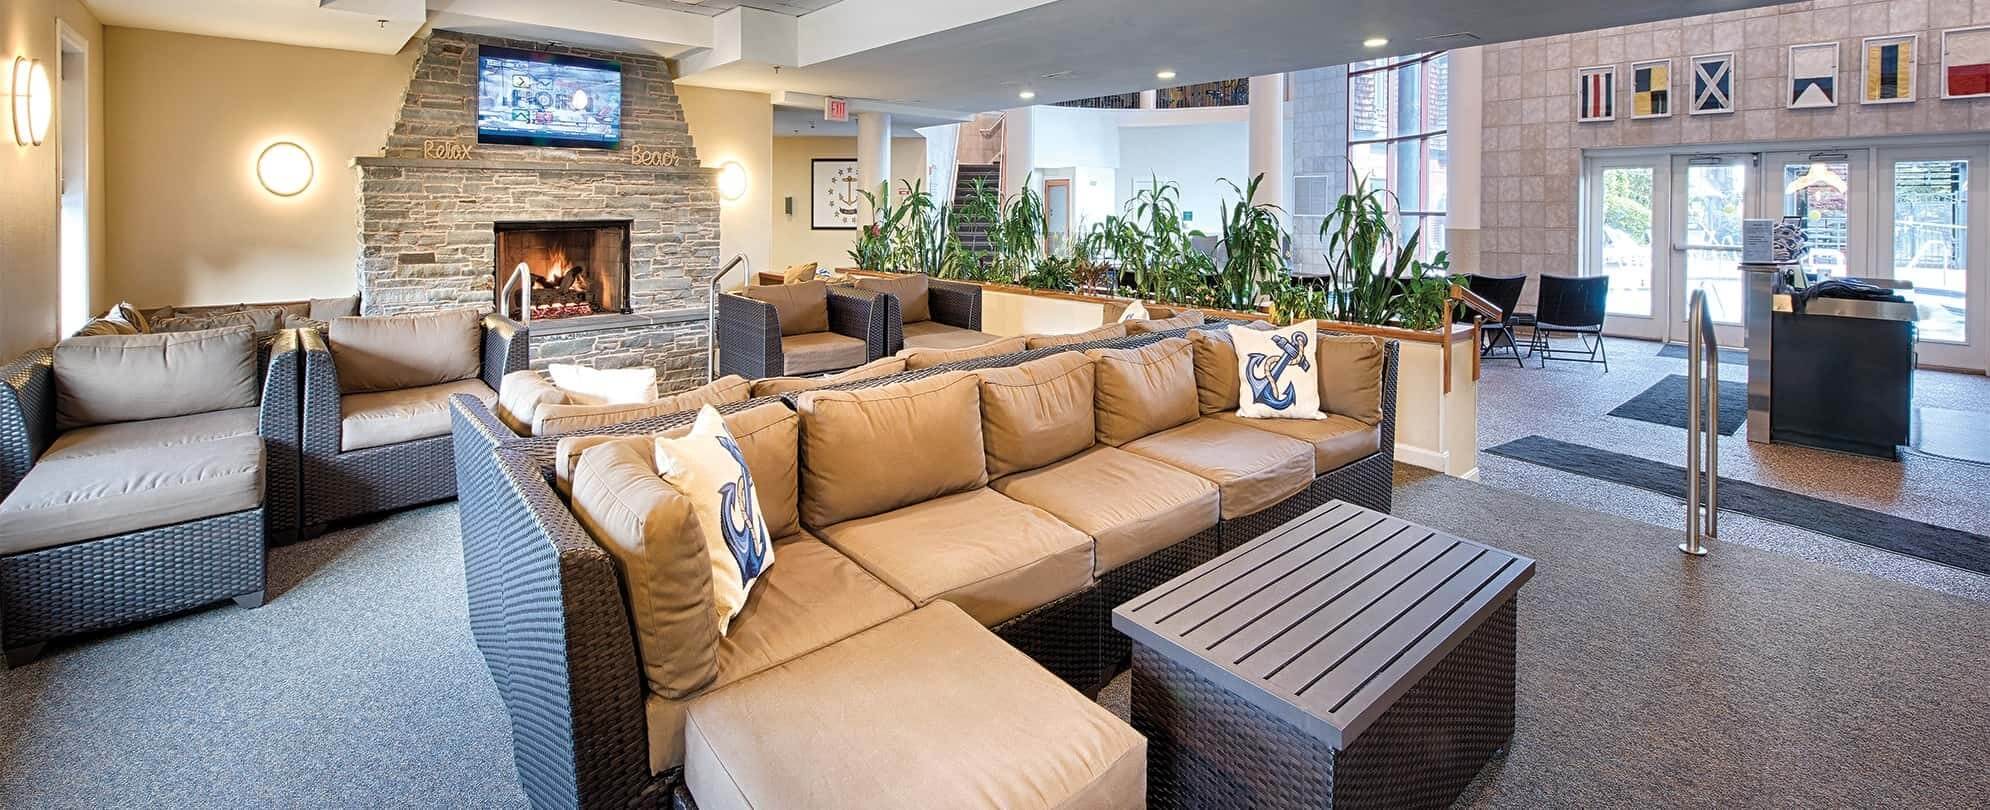 Wicker couches with tan cushions and fireplace in a Margaritaville Vacation Club by Wyndham resort lobby.